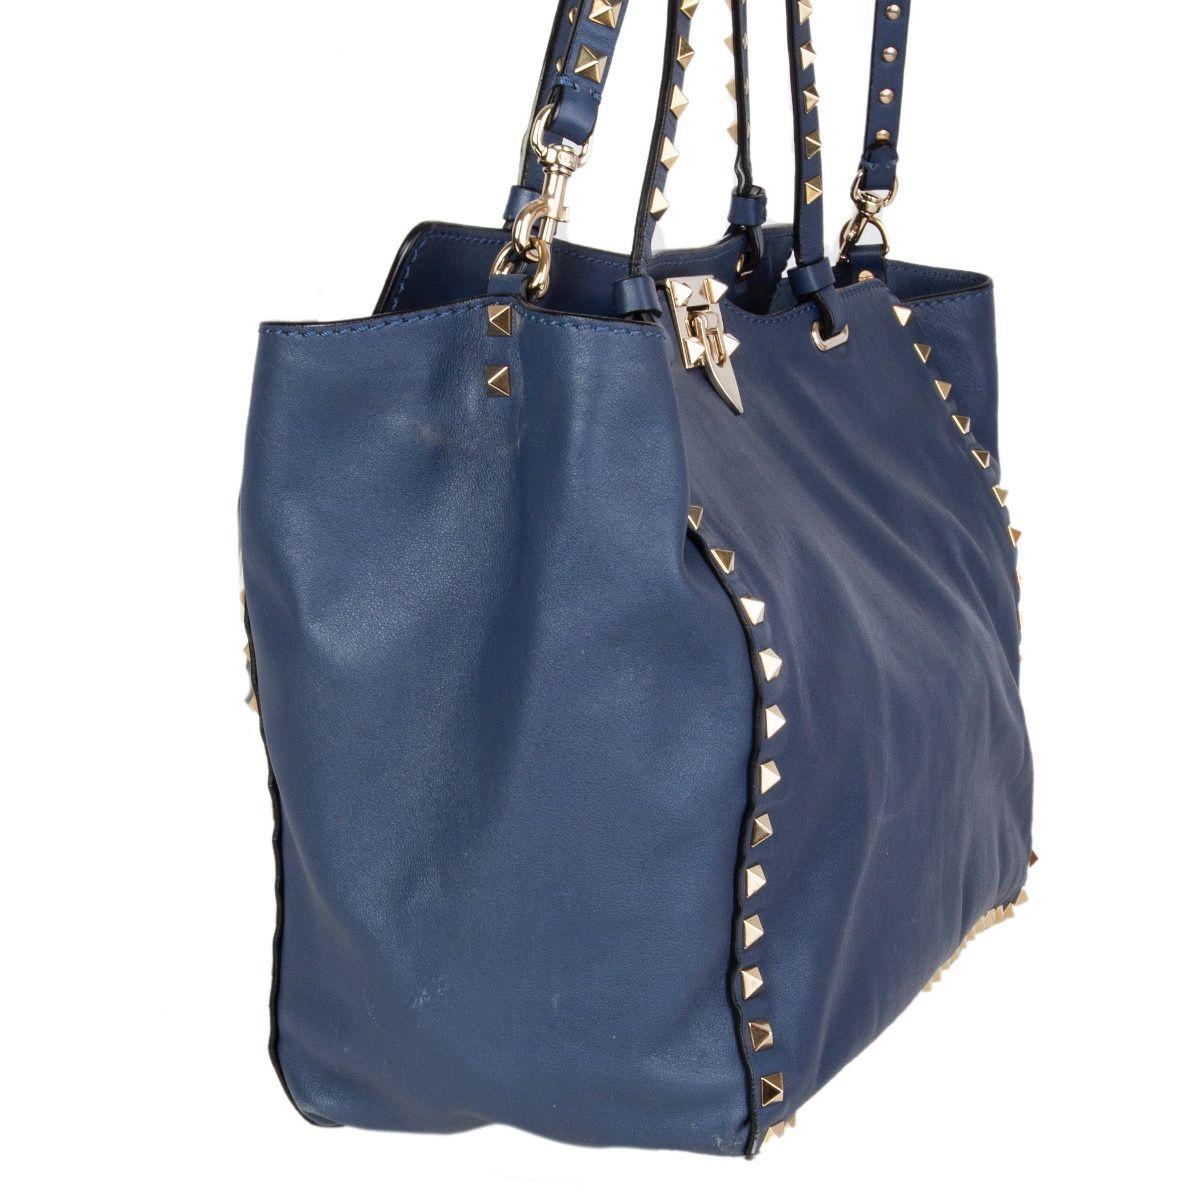 Valentino 'Medium Rockstud' shoulder bag in airforce blue calfskin featuring signature patinum-finish rockstuds in light gold-tone metal. Lined in off-white canvas with one zipper pocket against the back and two open pockets attached. Comes with a